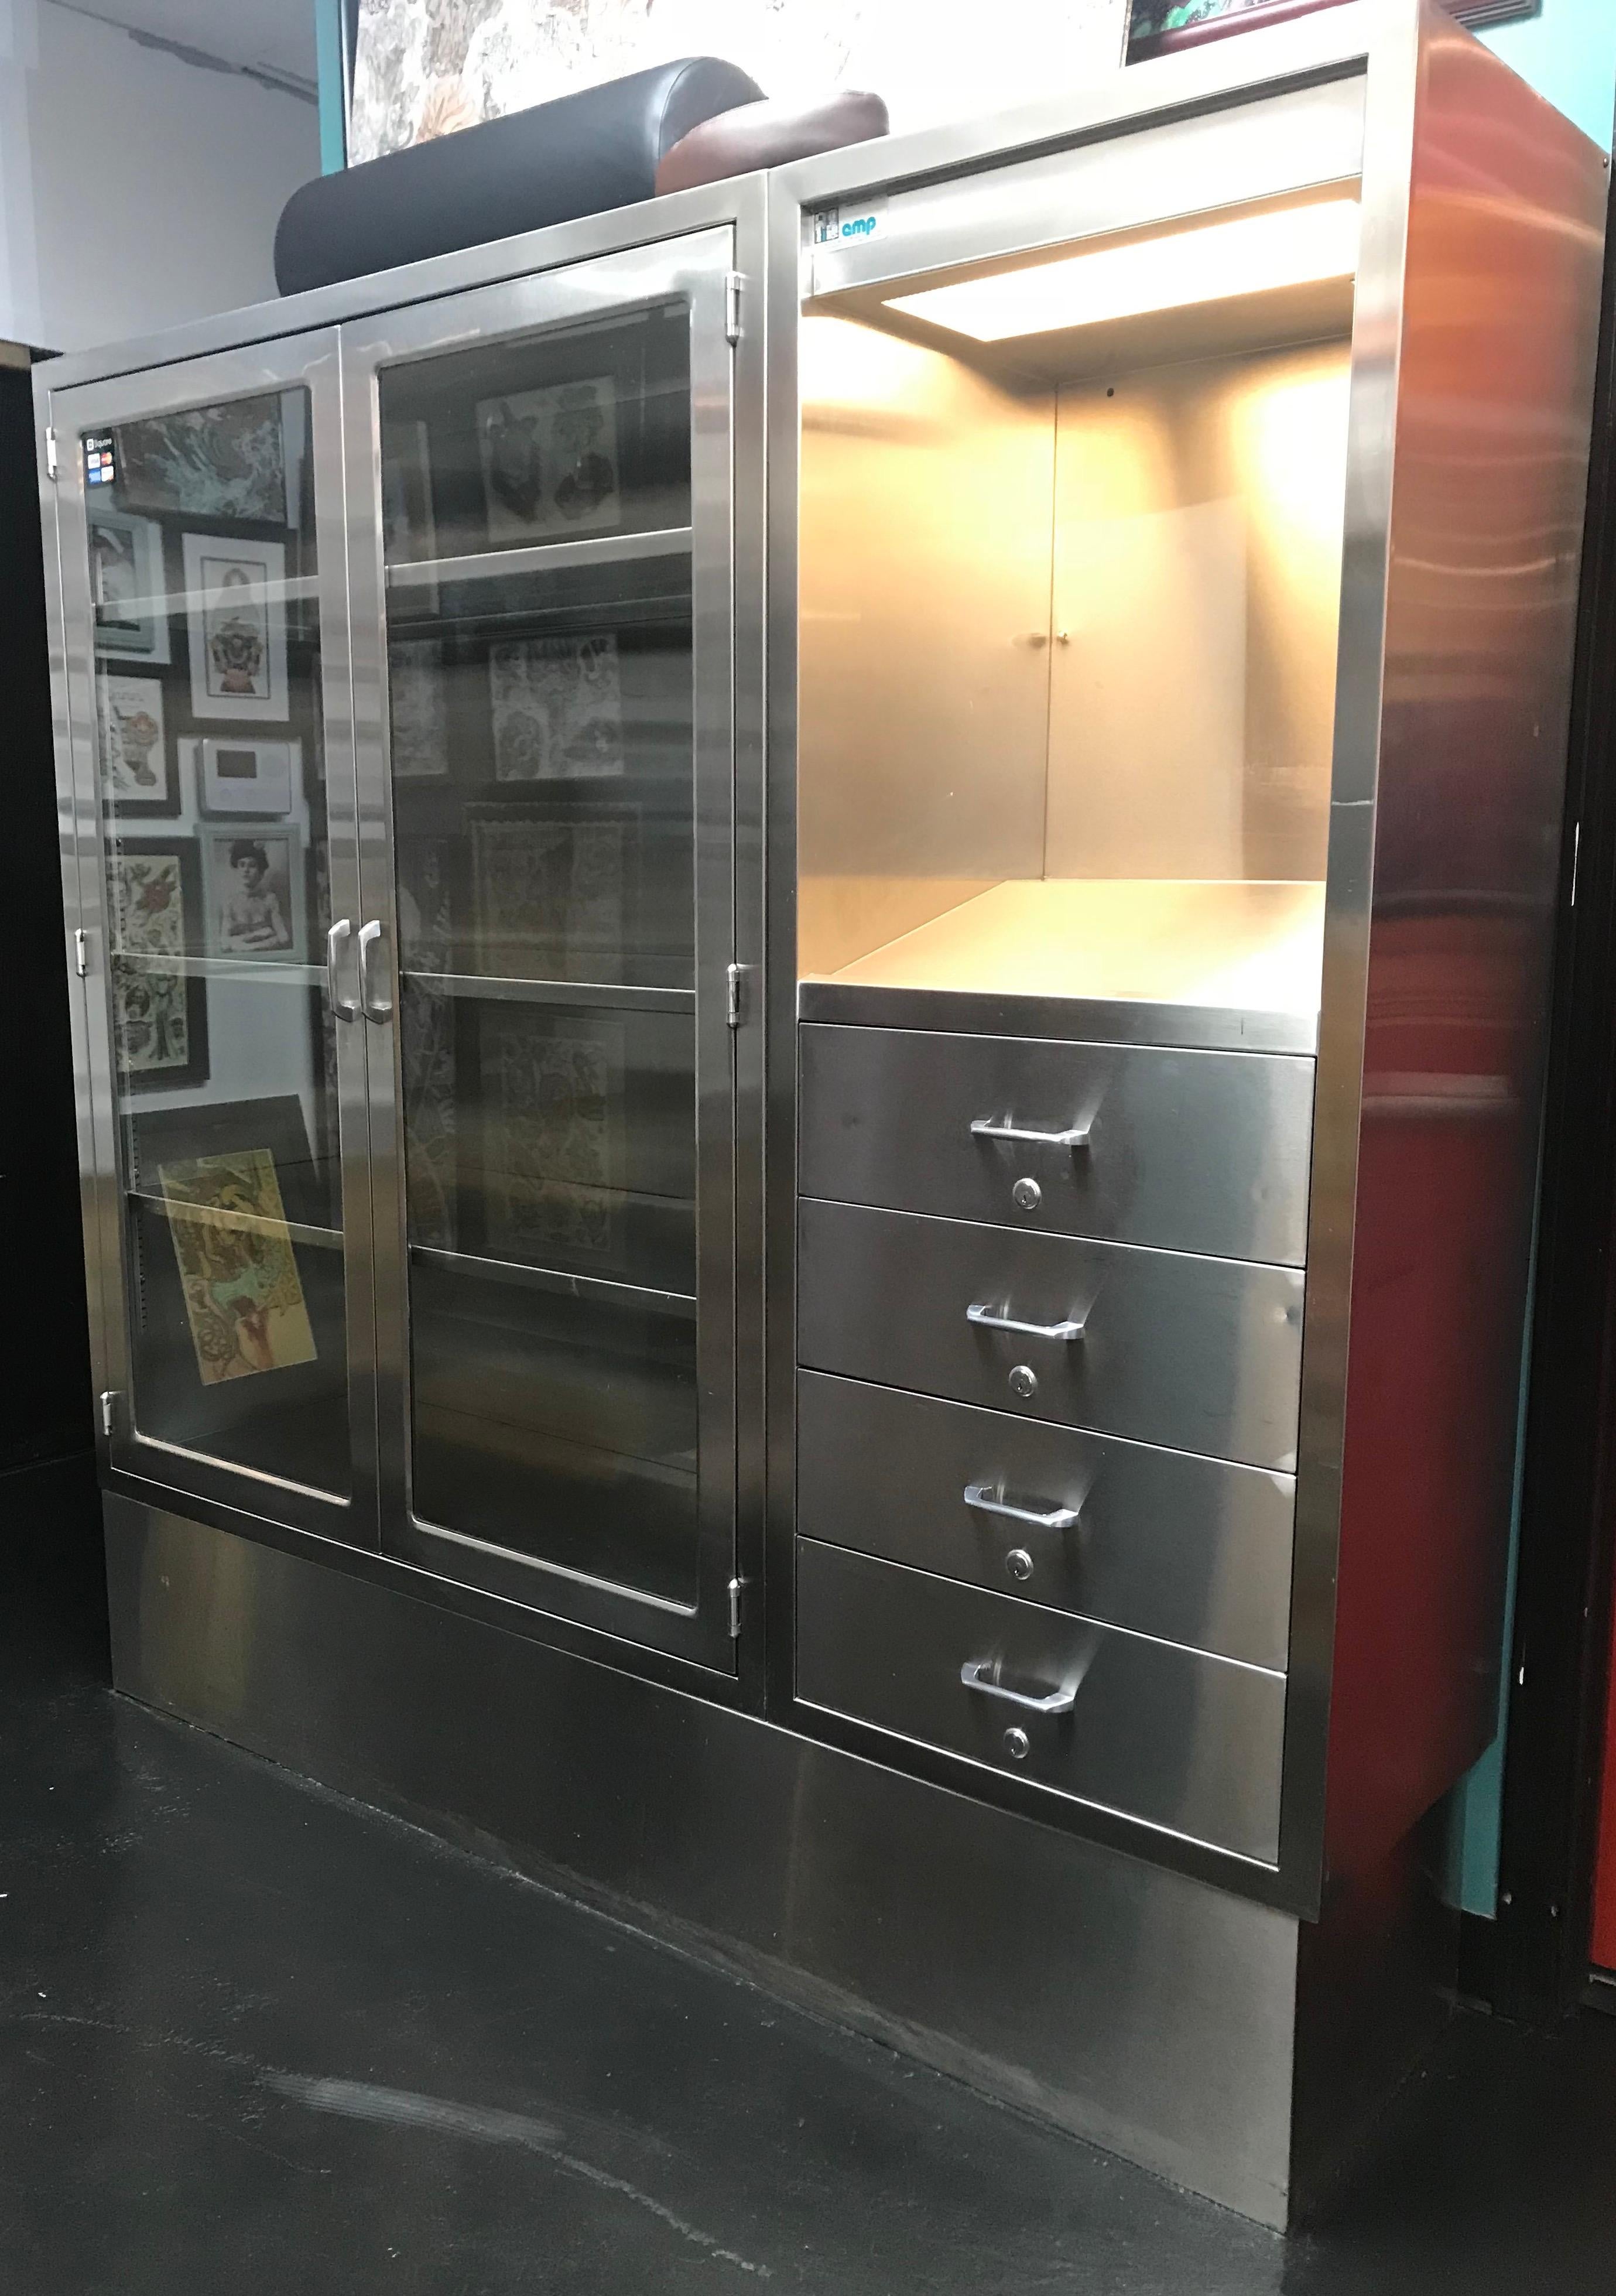 Stainless steel medical cabinet with four adjustable shelves and tempered glass door panels. Has working lighting display and four locking drawers. Extensive and secure storage capacity. Very sharp. Comprehensive. A significant piece. Two identical